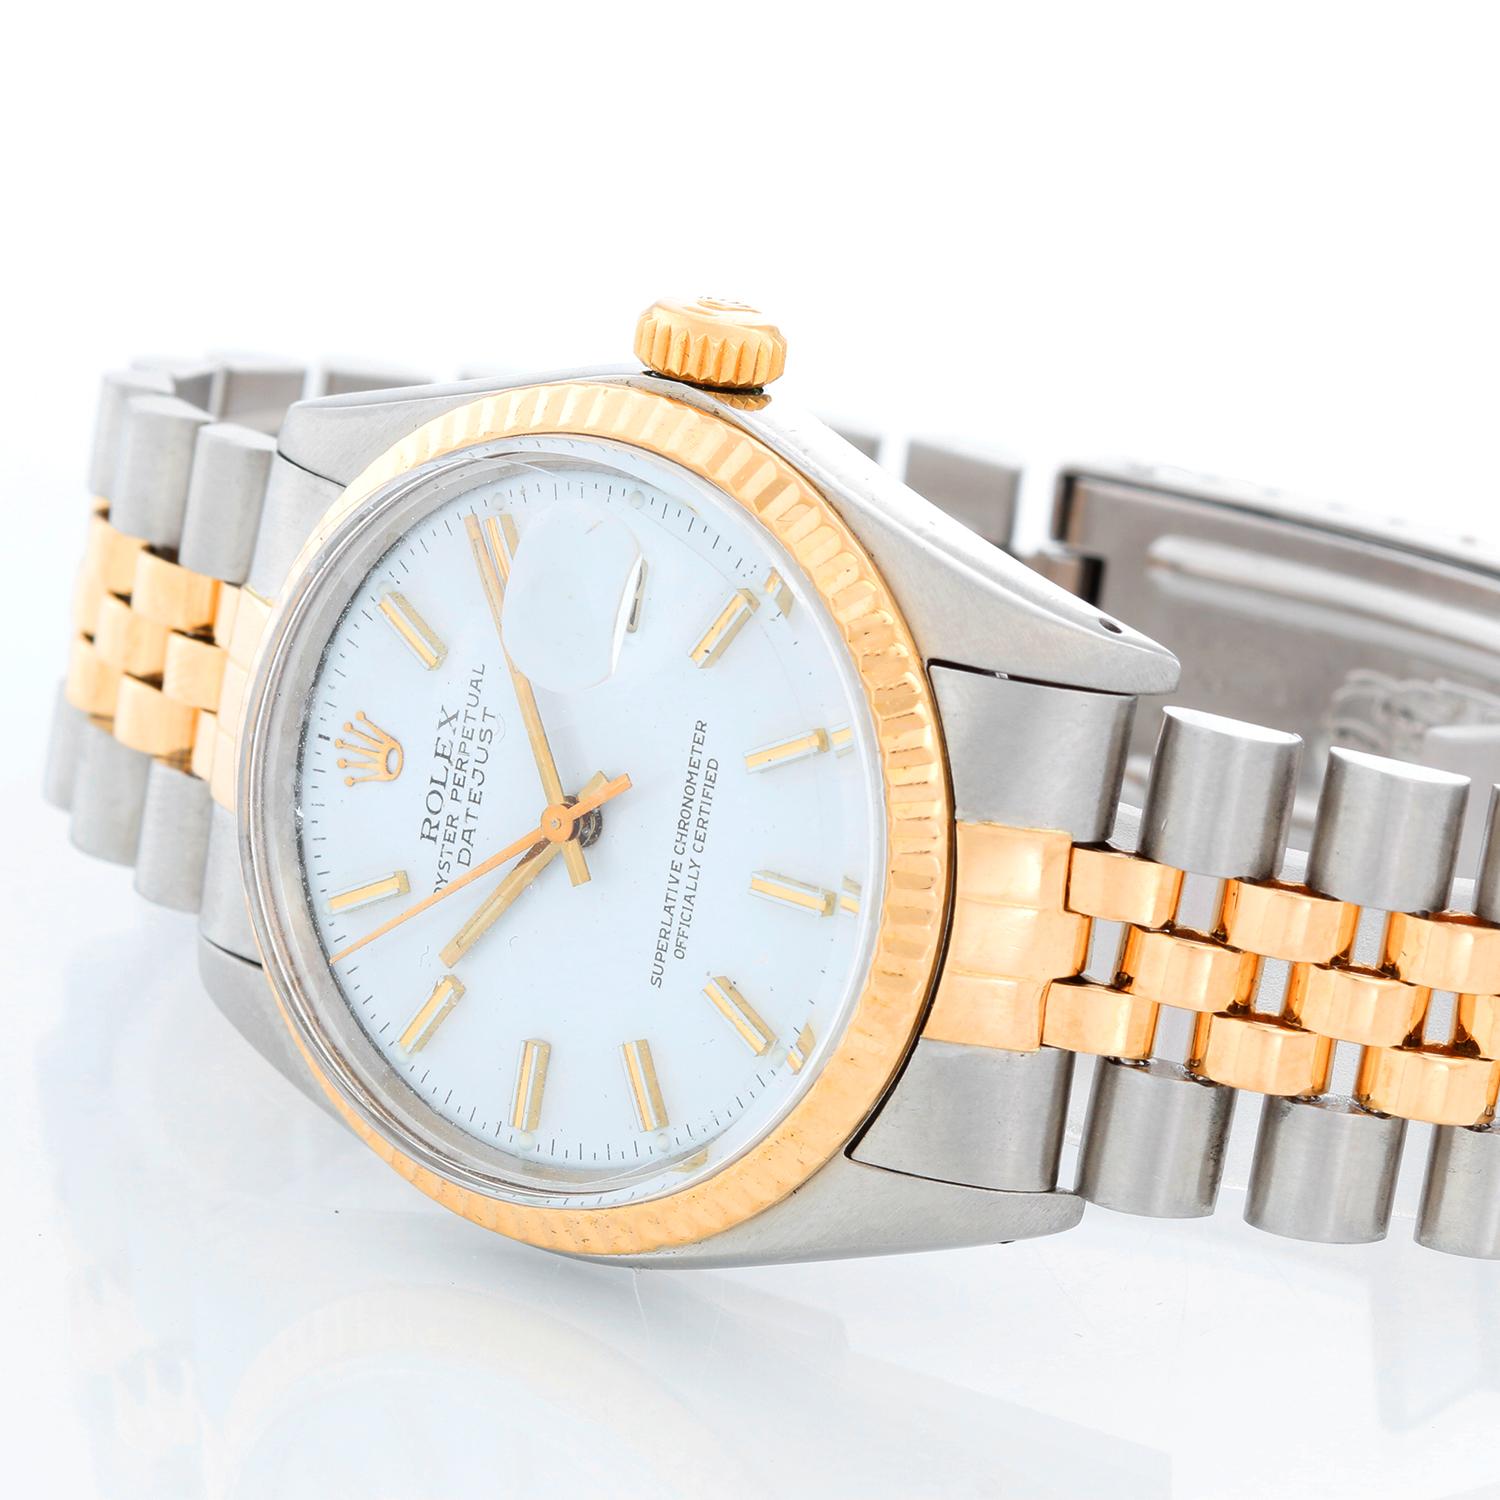 Men's Rolex Datejust 2-Tone Watch 16013 - Automatic winding, 27 jewels, Quickset, acrylic crystal. Stainless steel case with custom diamond bezel ( 36 mm ). White dial with stick hour markers . Rolex yellow gold and stainless steel Jubilee bracelet.